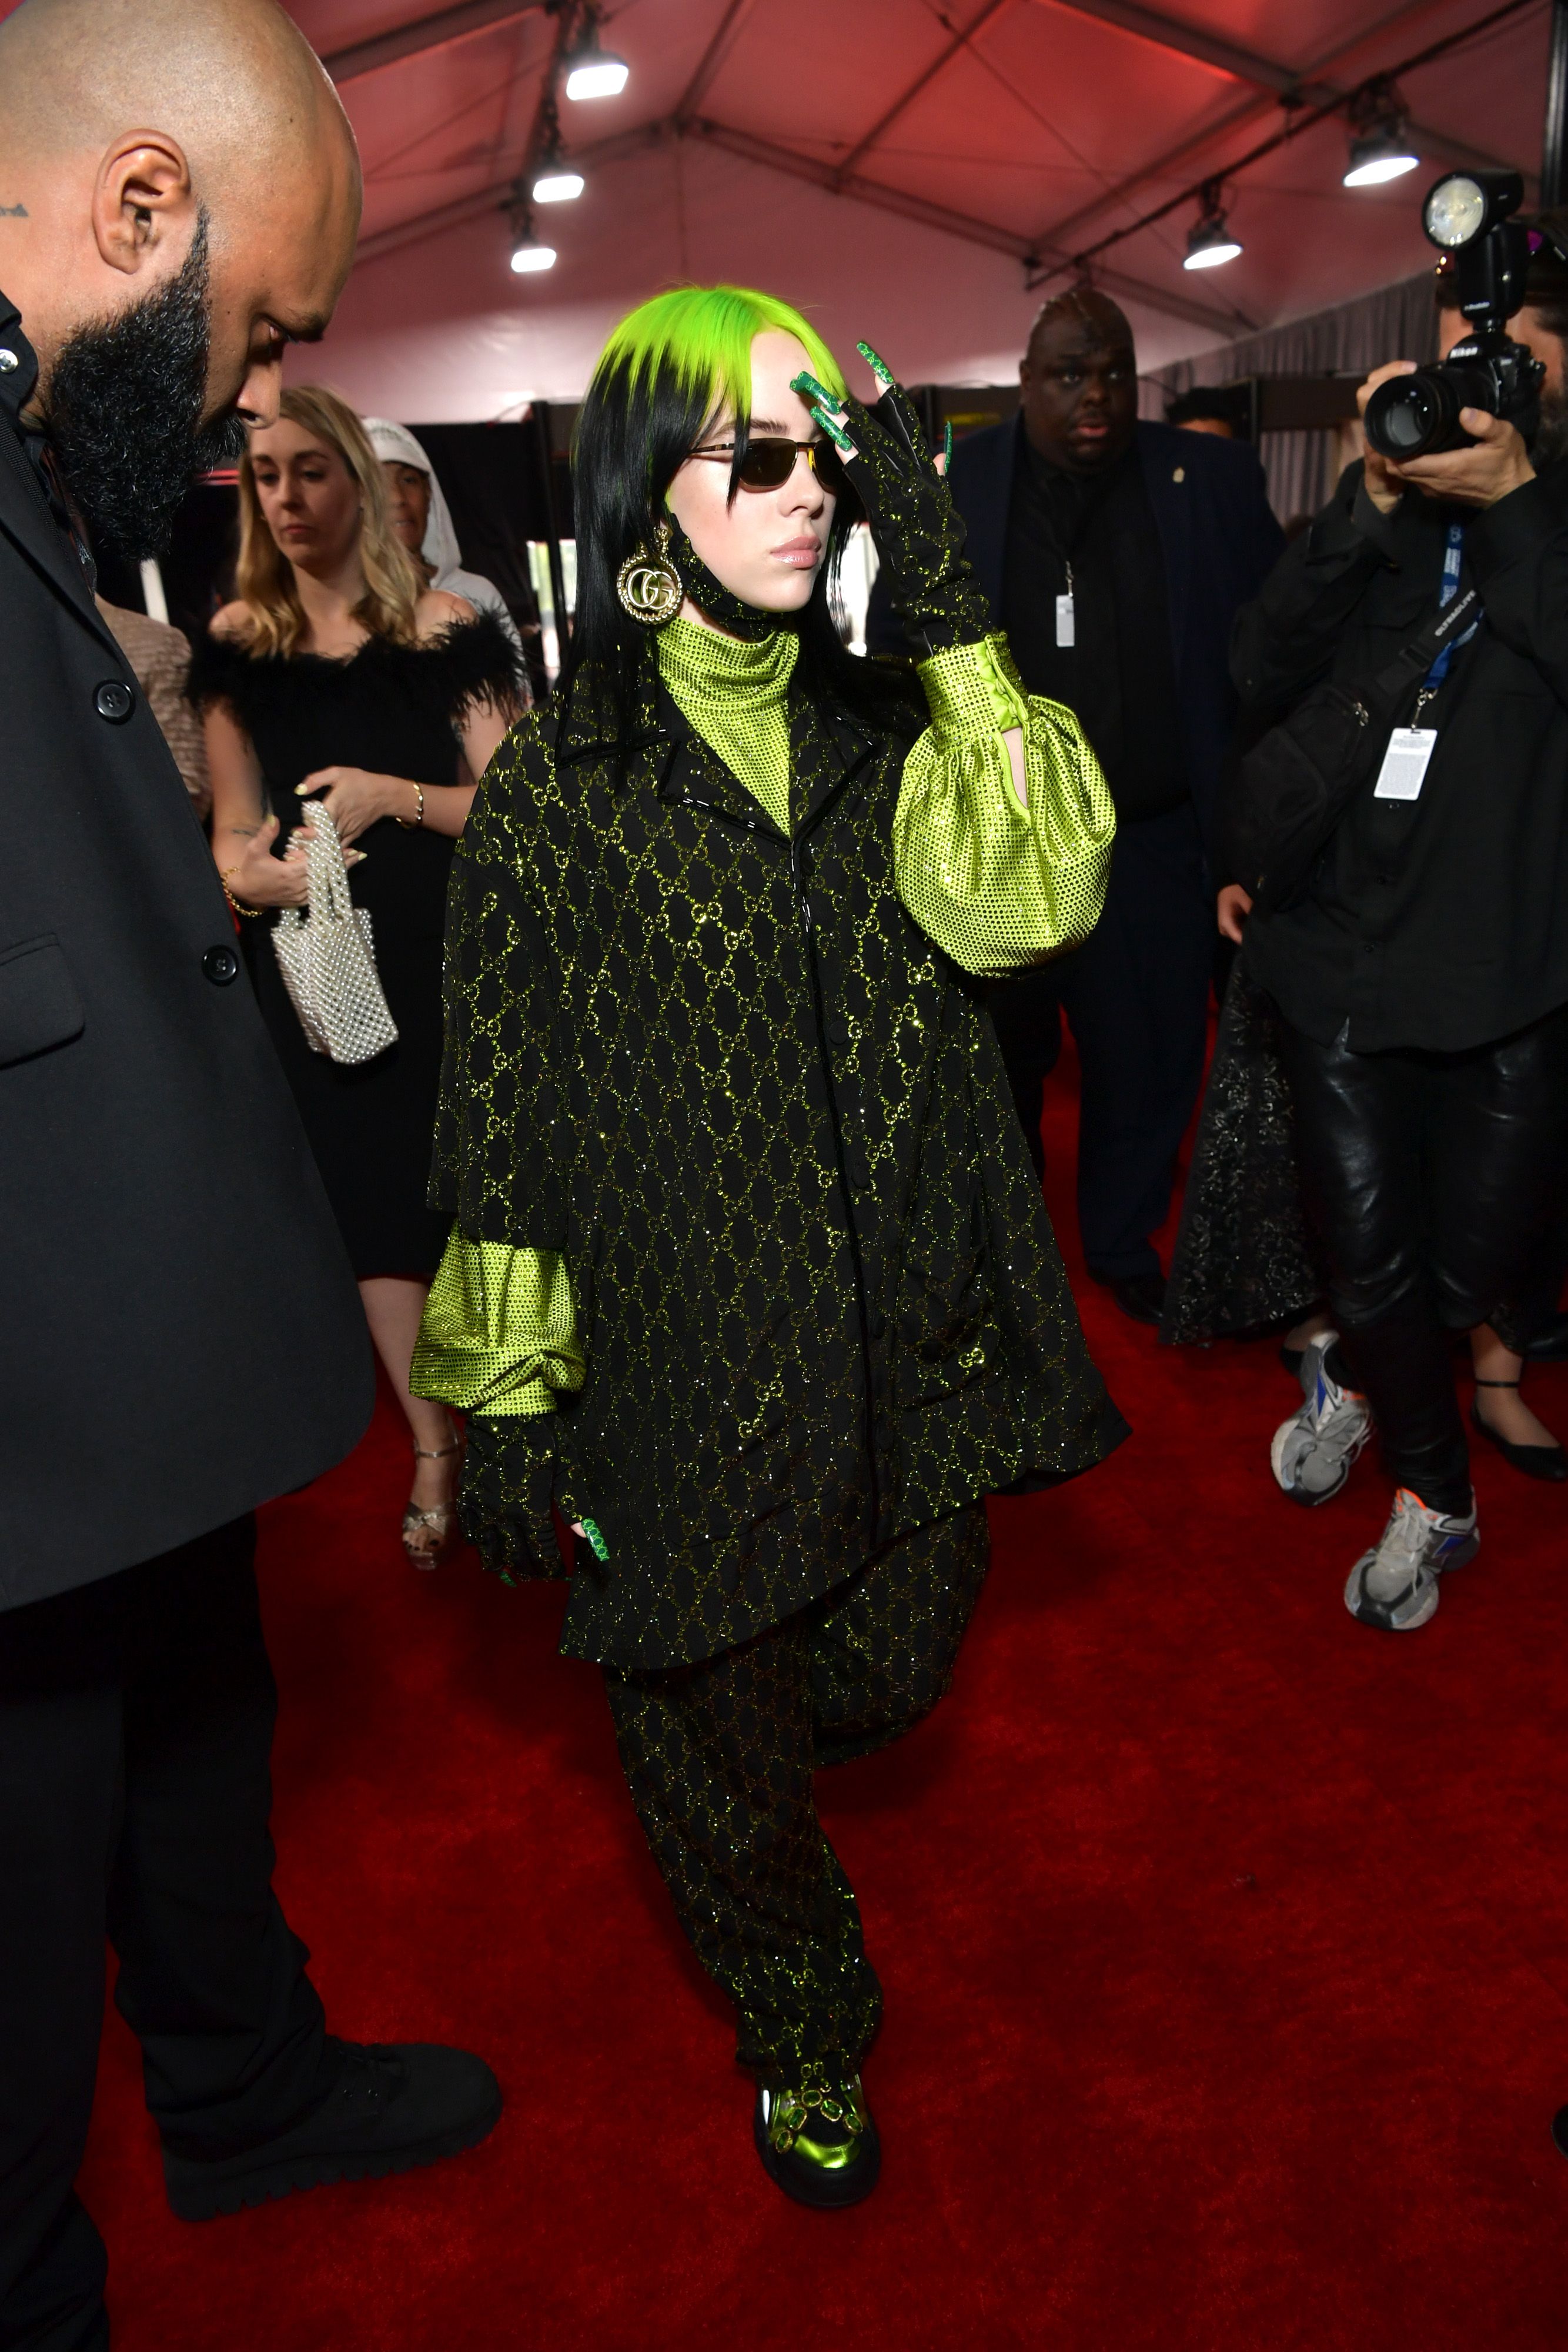 billie eilish gucci outfit,Save up to 15%,www.ilcascinone.com